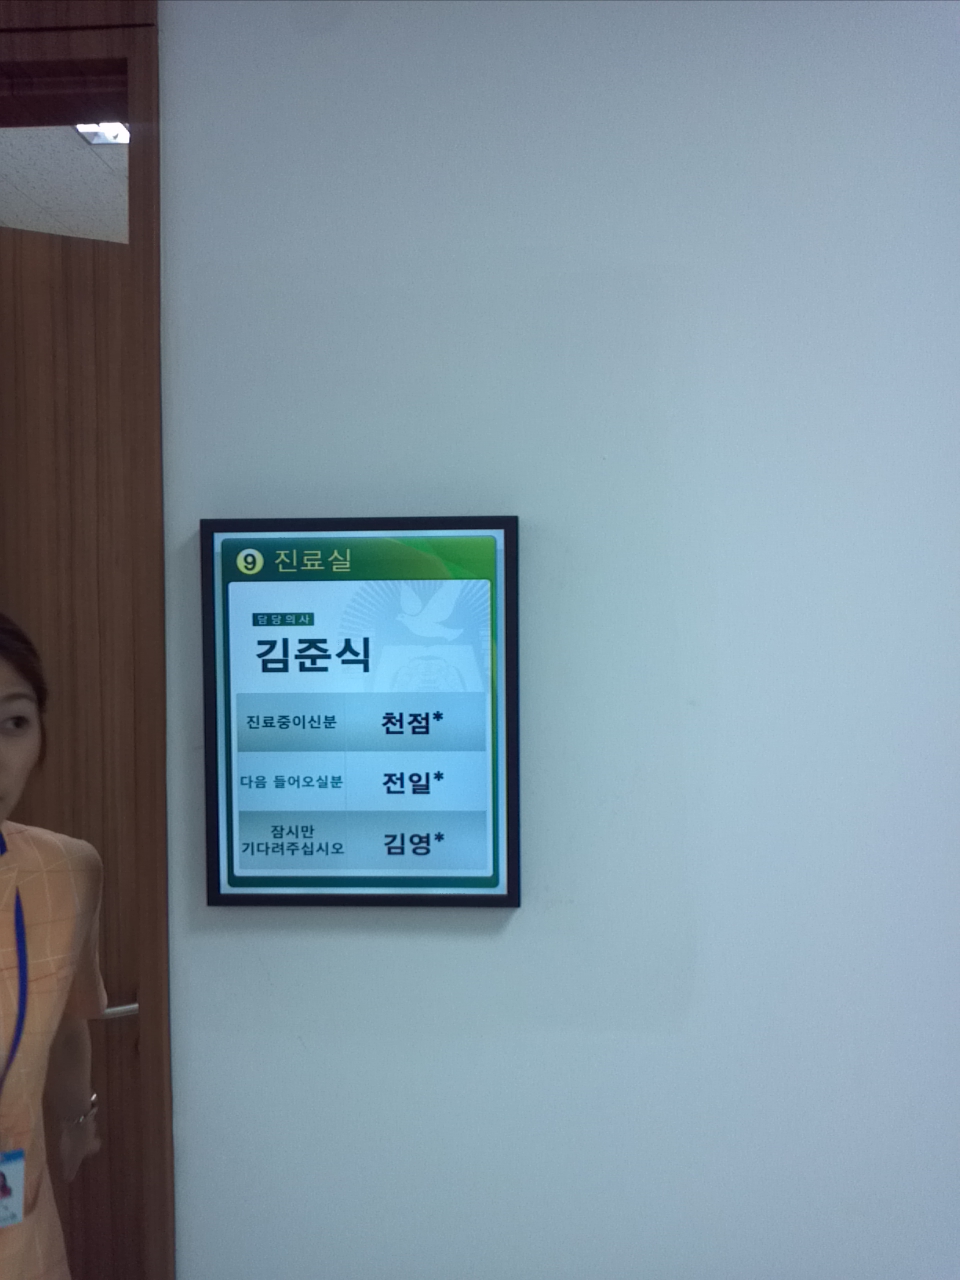 Patients waiting System for Seoul City Hospital 썸네일